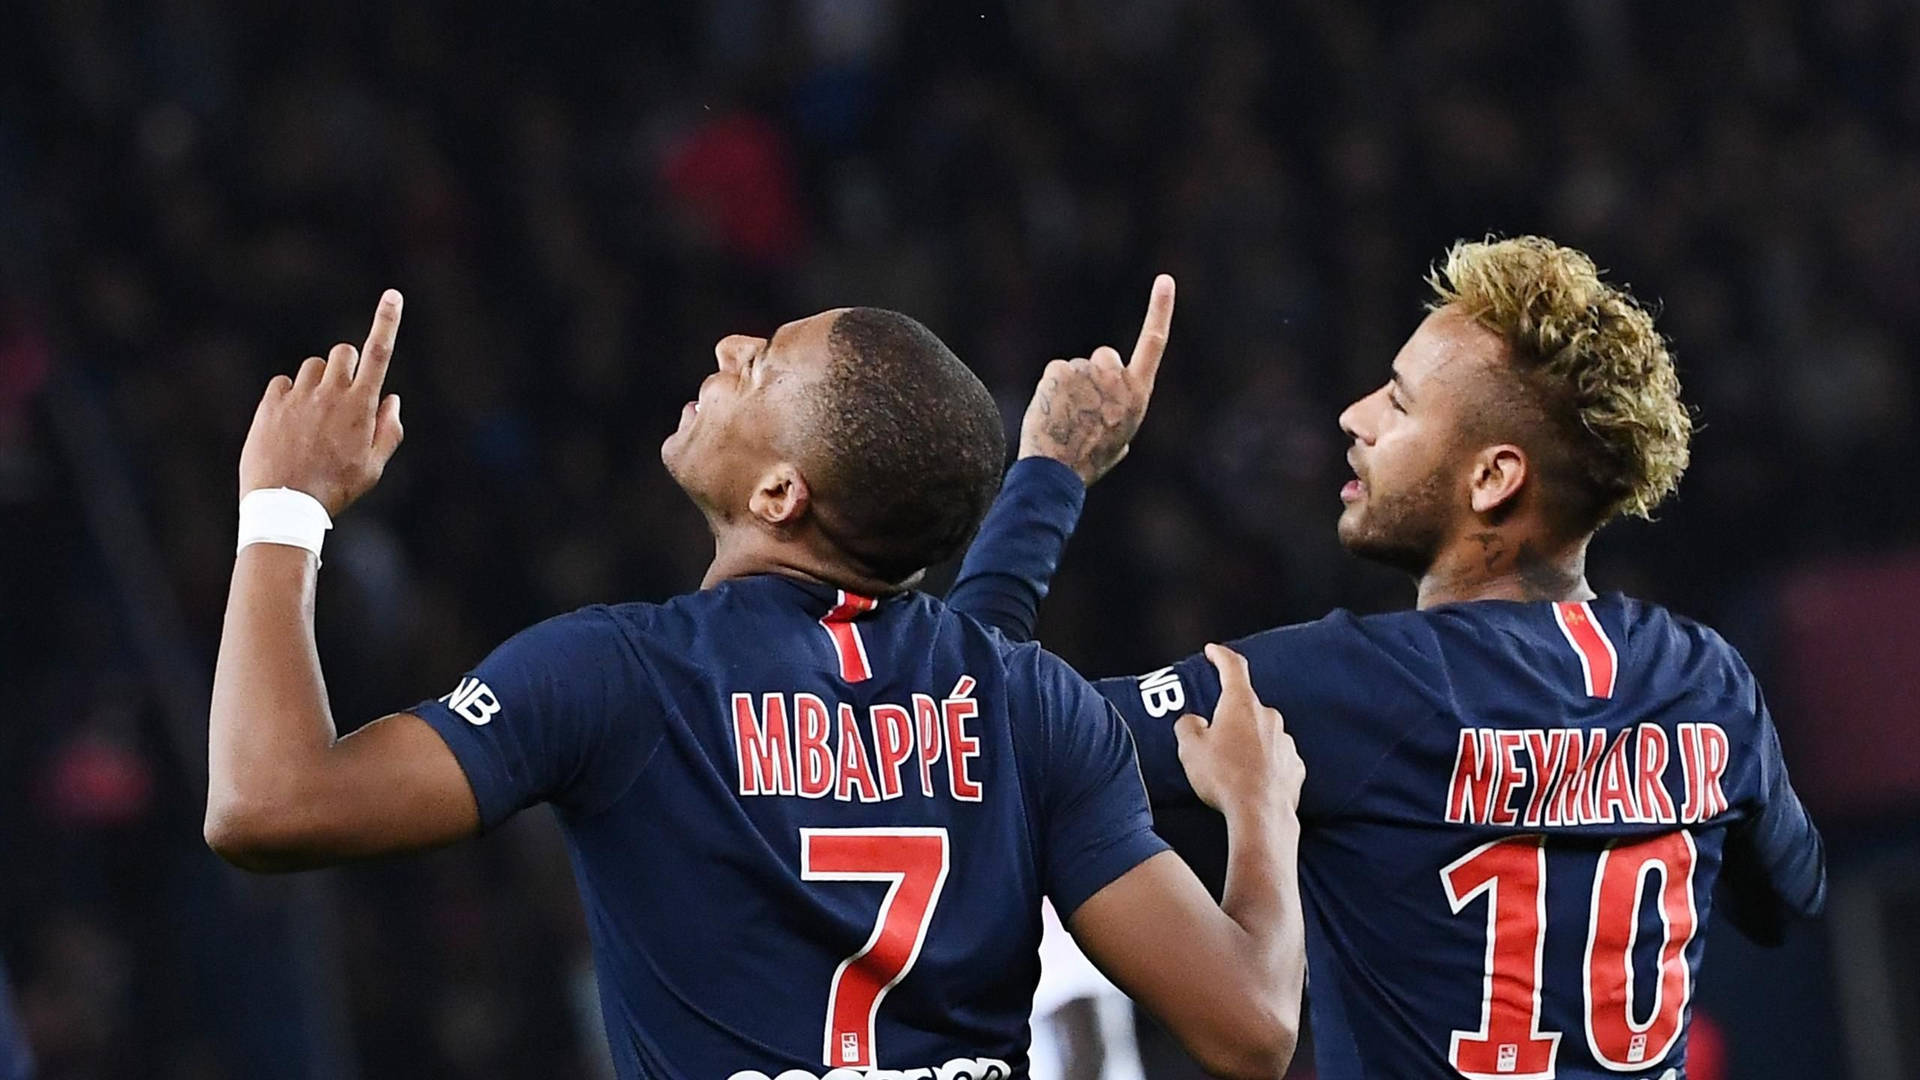 Neymar And Mbappe Pointing Above Wallpaper